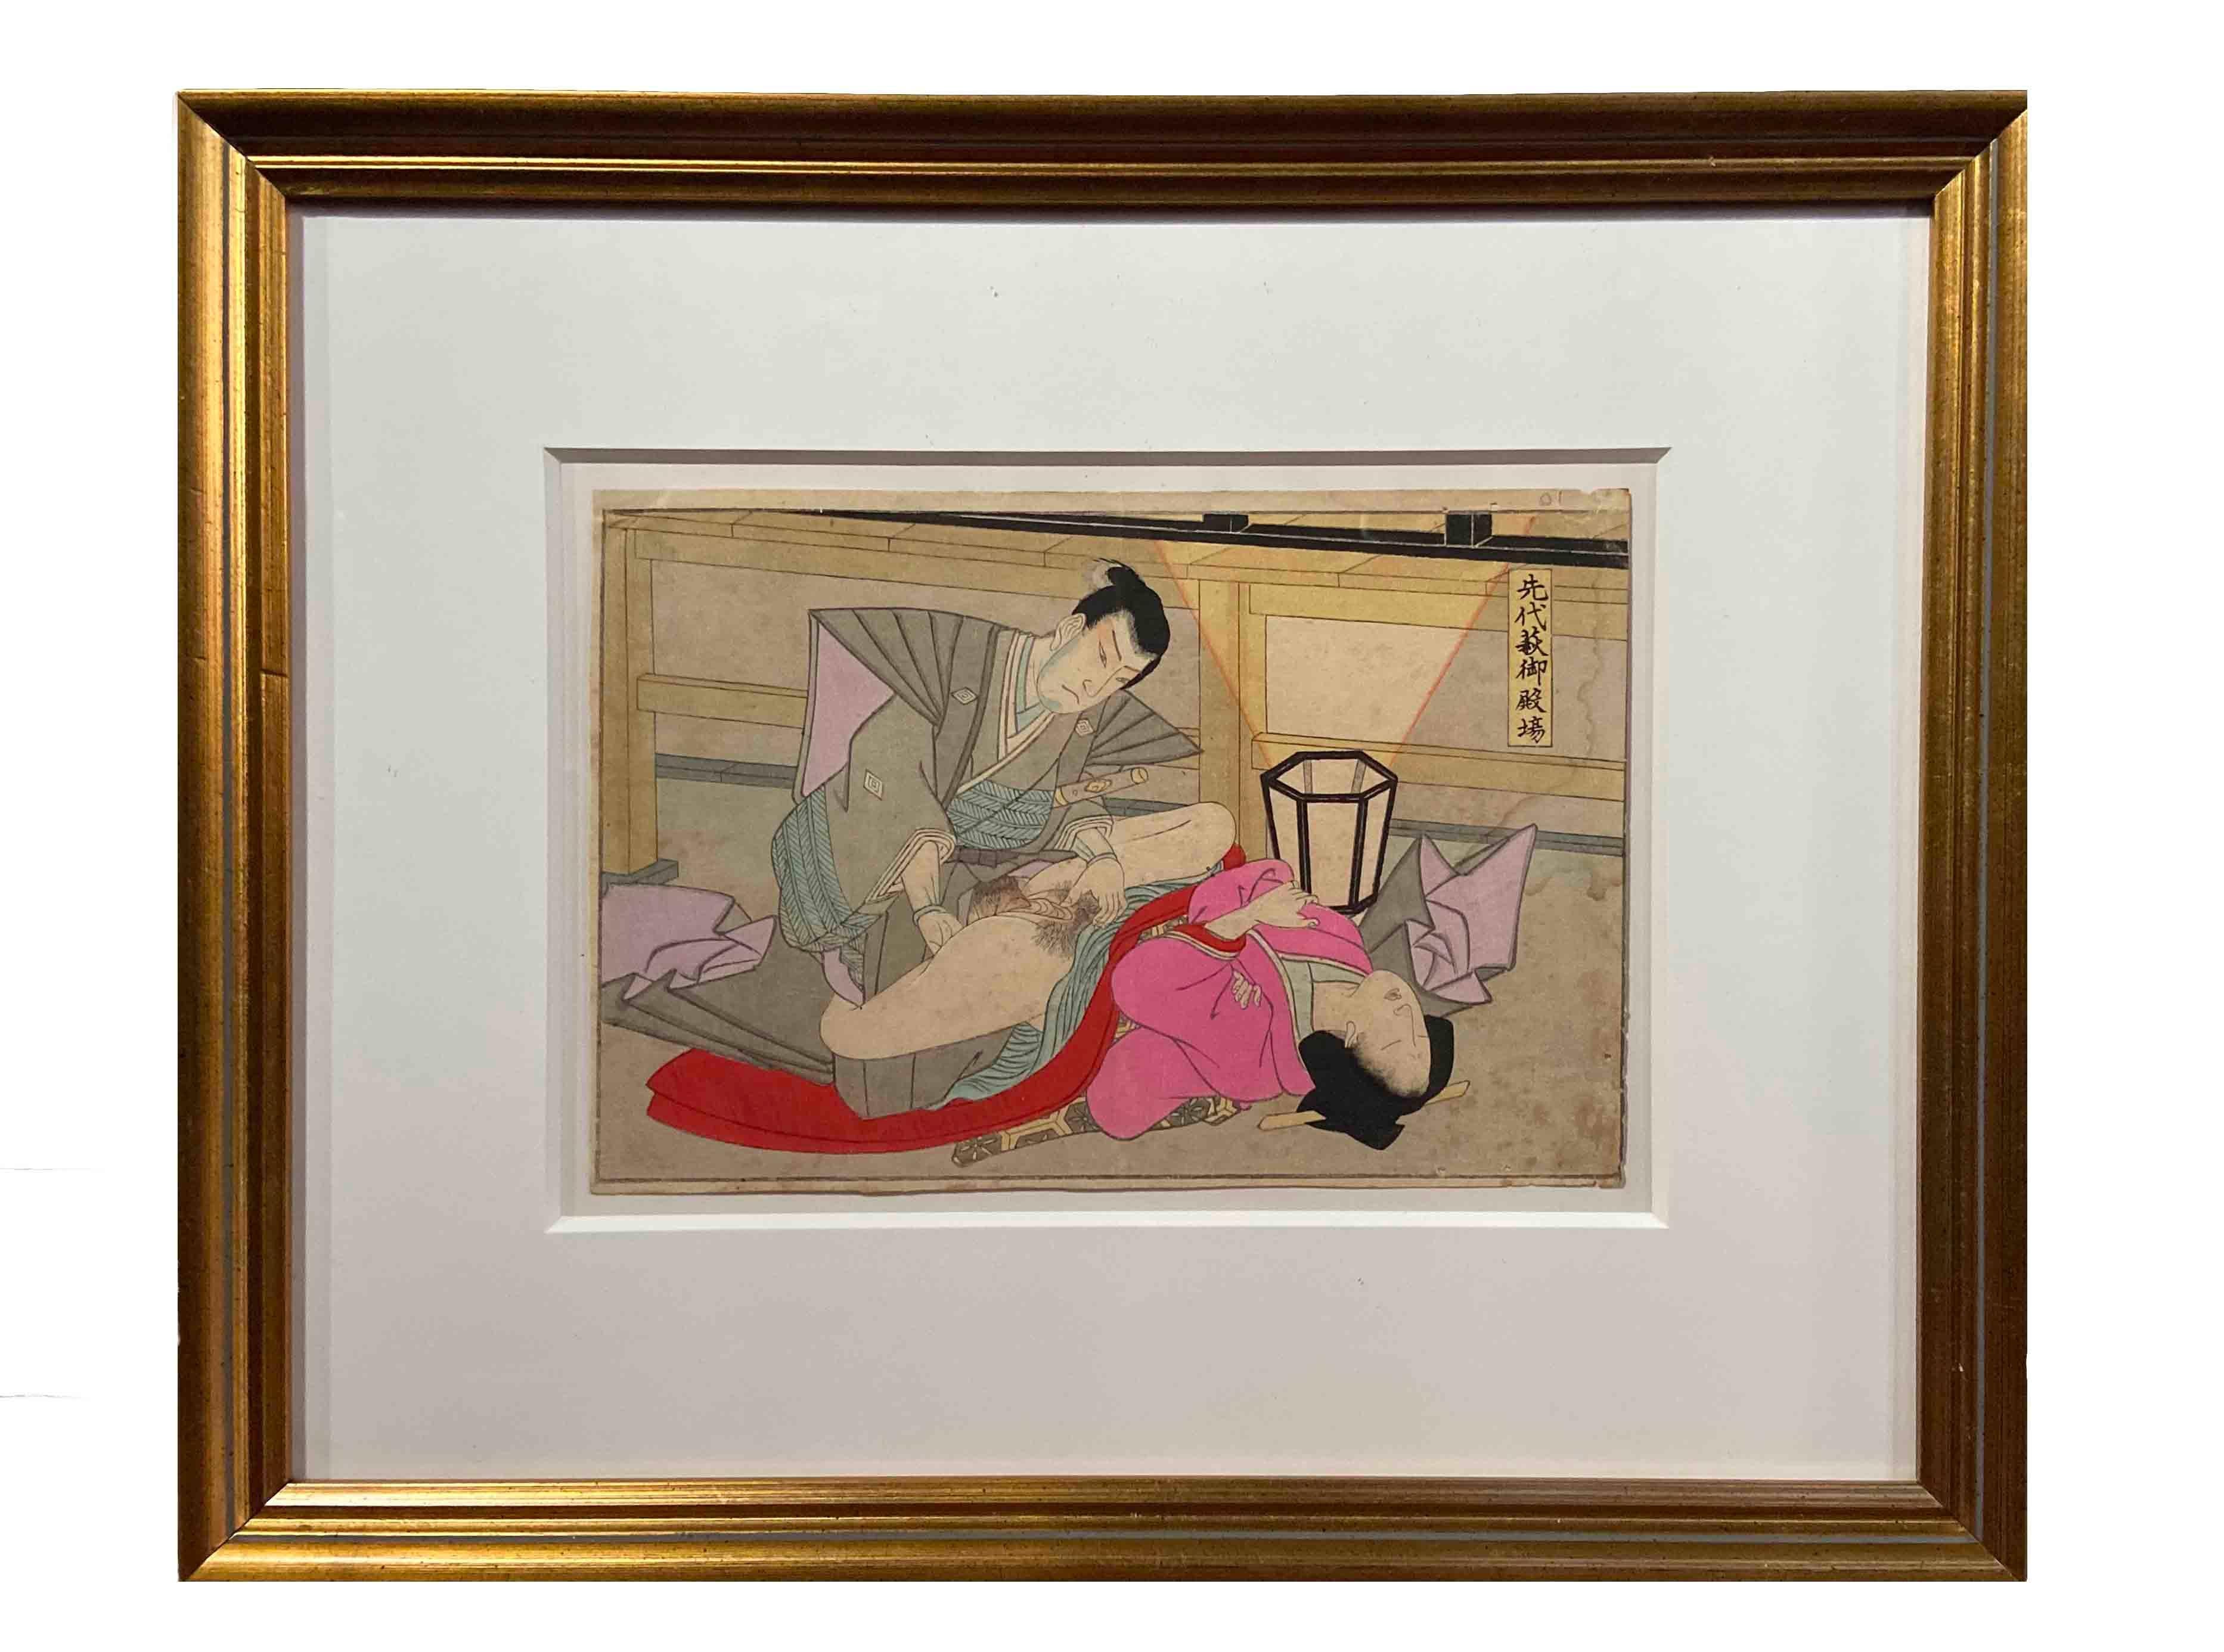 An antique Japanese Shunga woodblock print in gilt frame depicting a man and a woman making love. Created in Japan, this woodblock print called a Shunga and depicting a couple making love, derives from an erotic artistic tradition featuring graphic